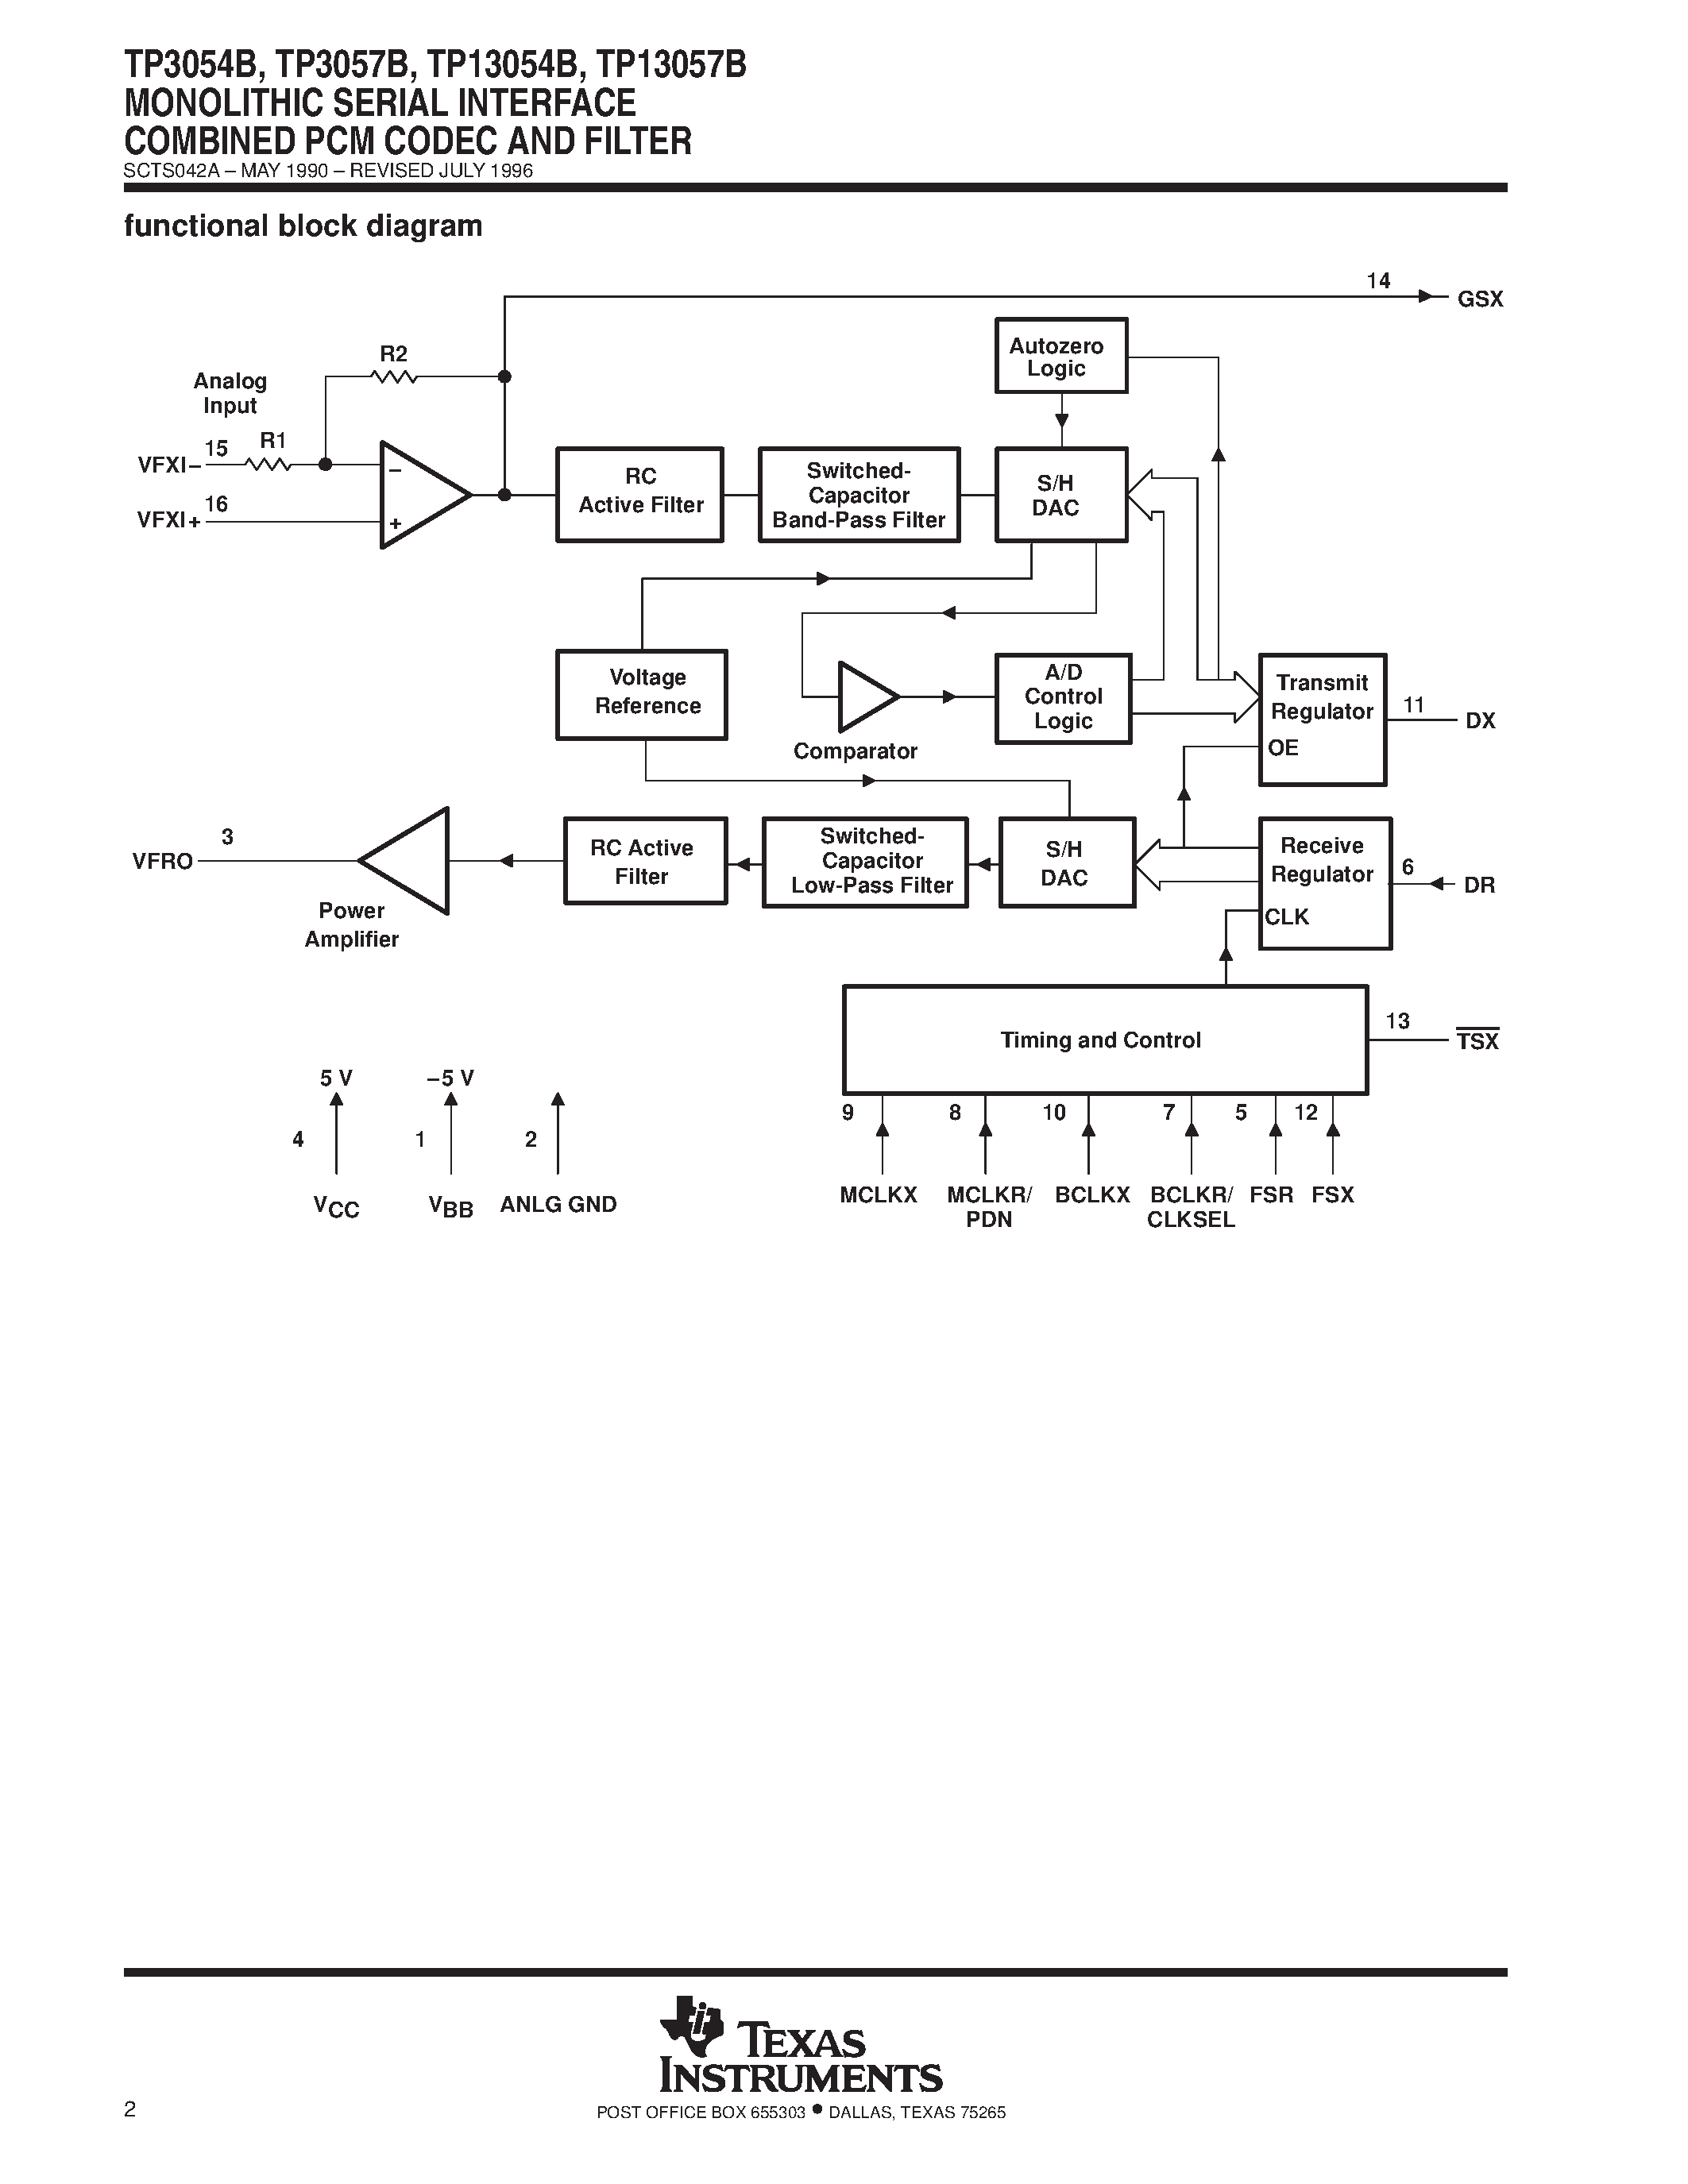 Datasheet TP13054B - MONOLITHIC SERIAL INTERFACE COMBINED PCM CODEC AND FILTER page 2